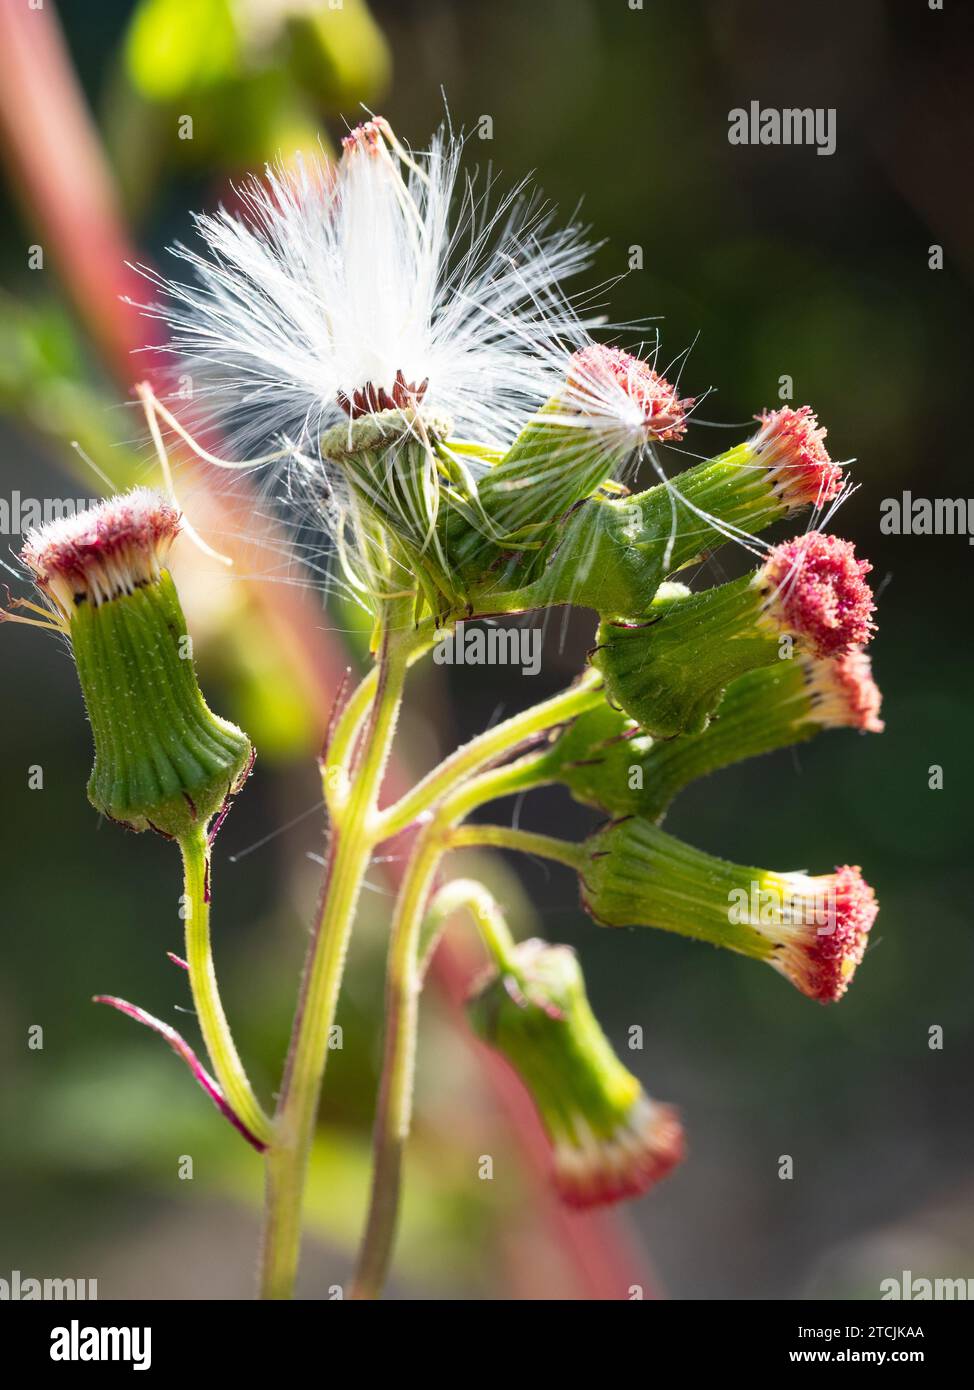 Red flower heads and white Tufty seeds of the Thickhead weed plant Stock Photo